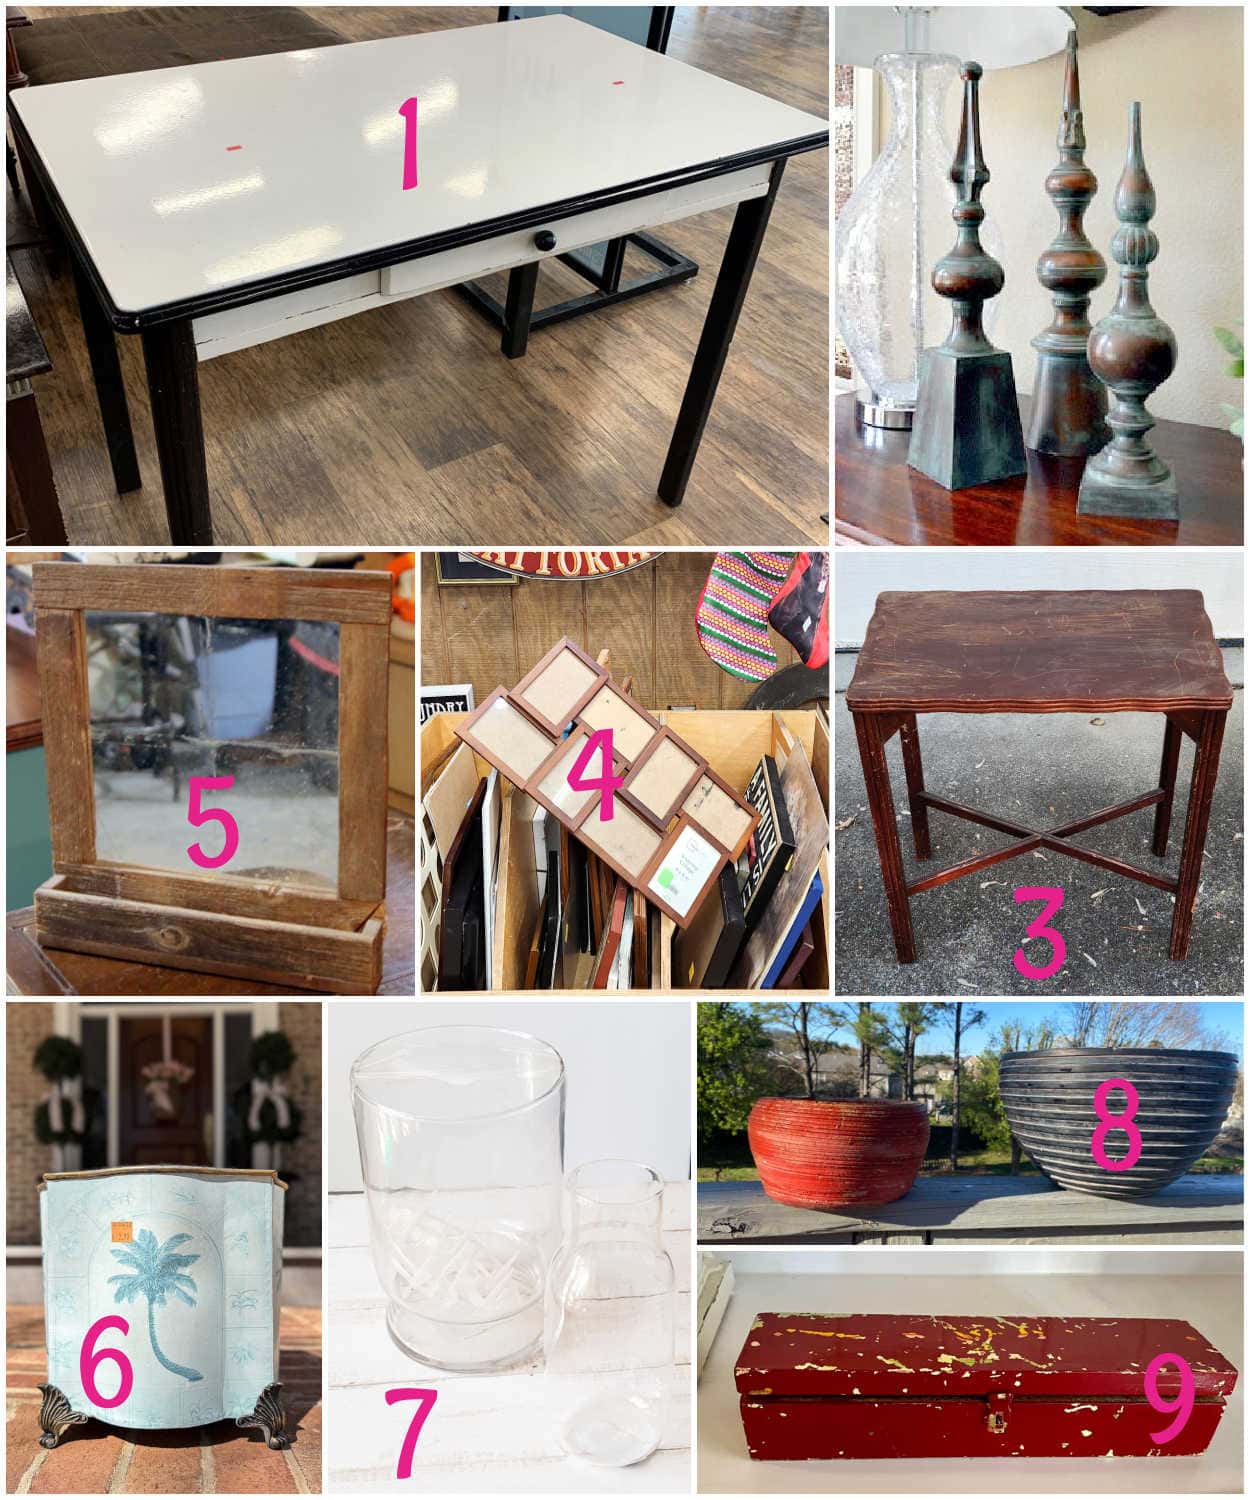 upcycle ideas and craft projects from thrift store finds